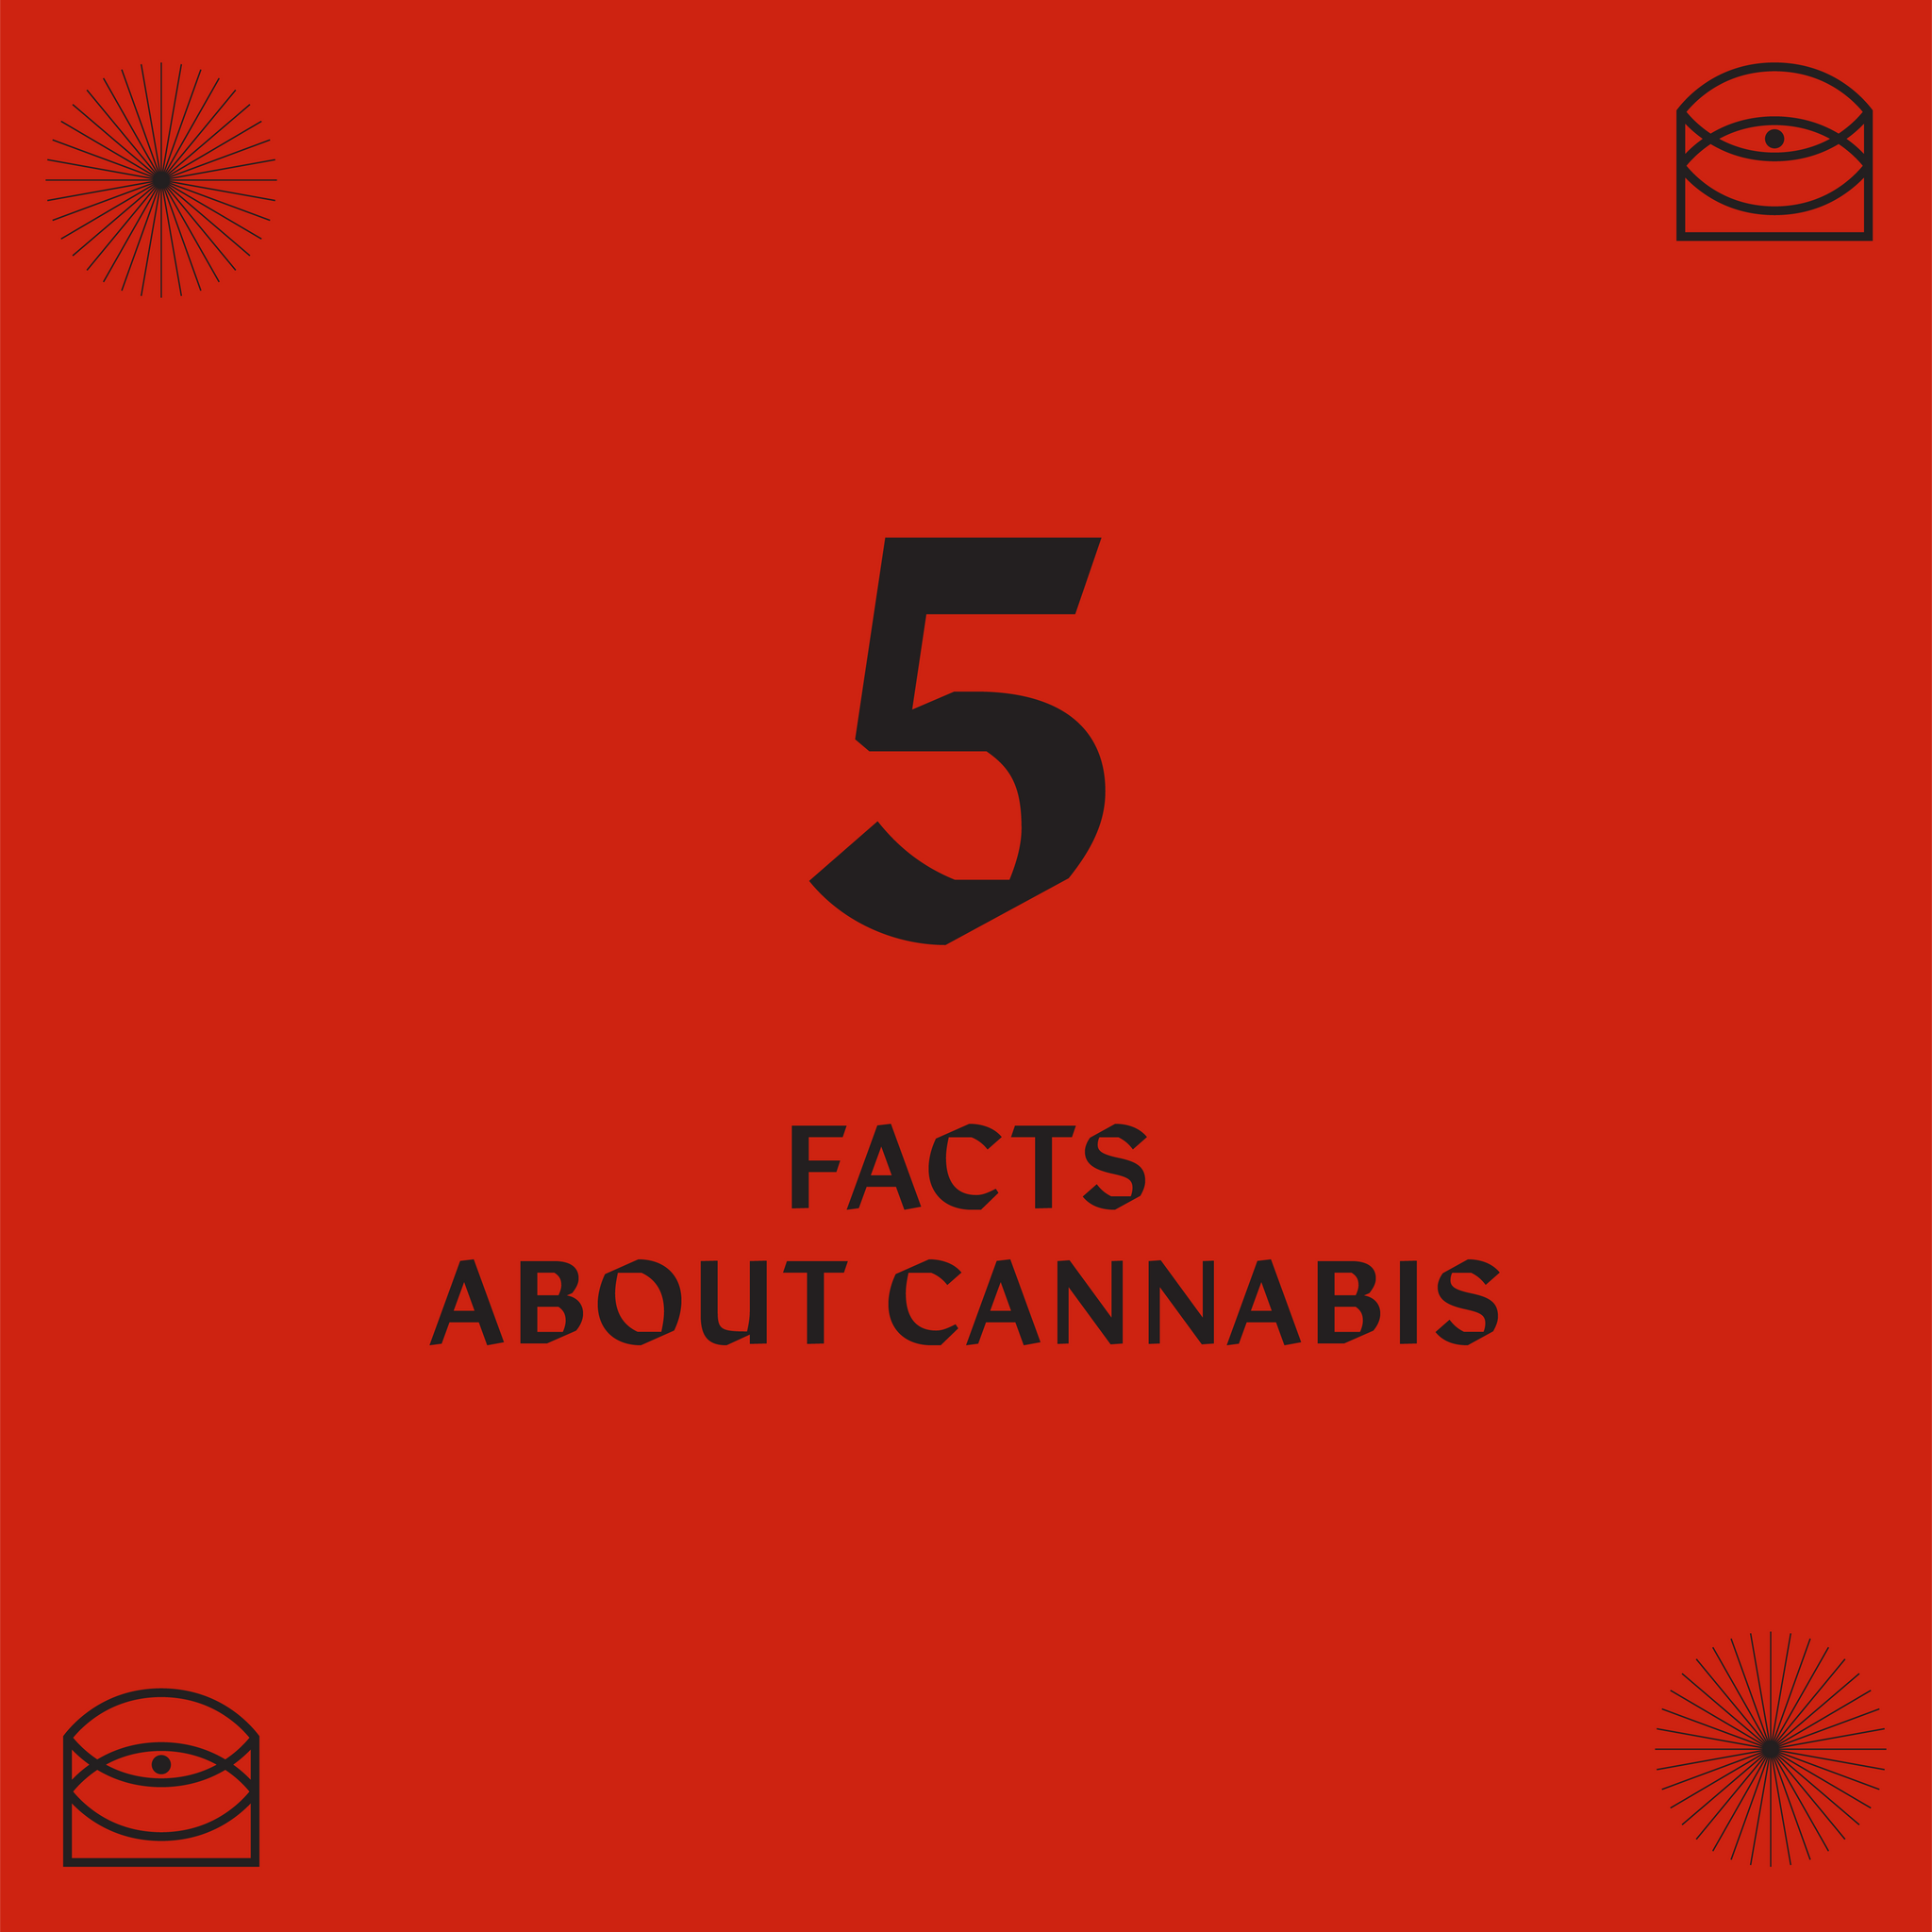 5 Facts About Cannabis